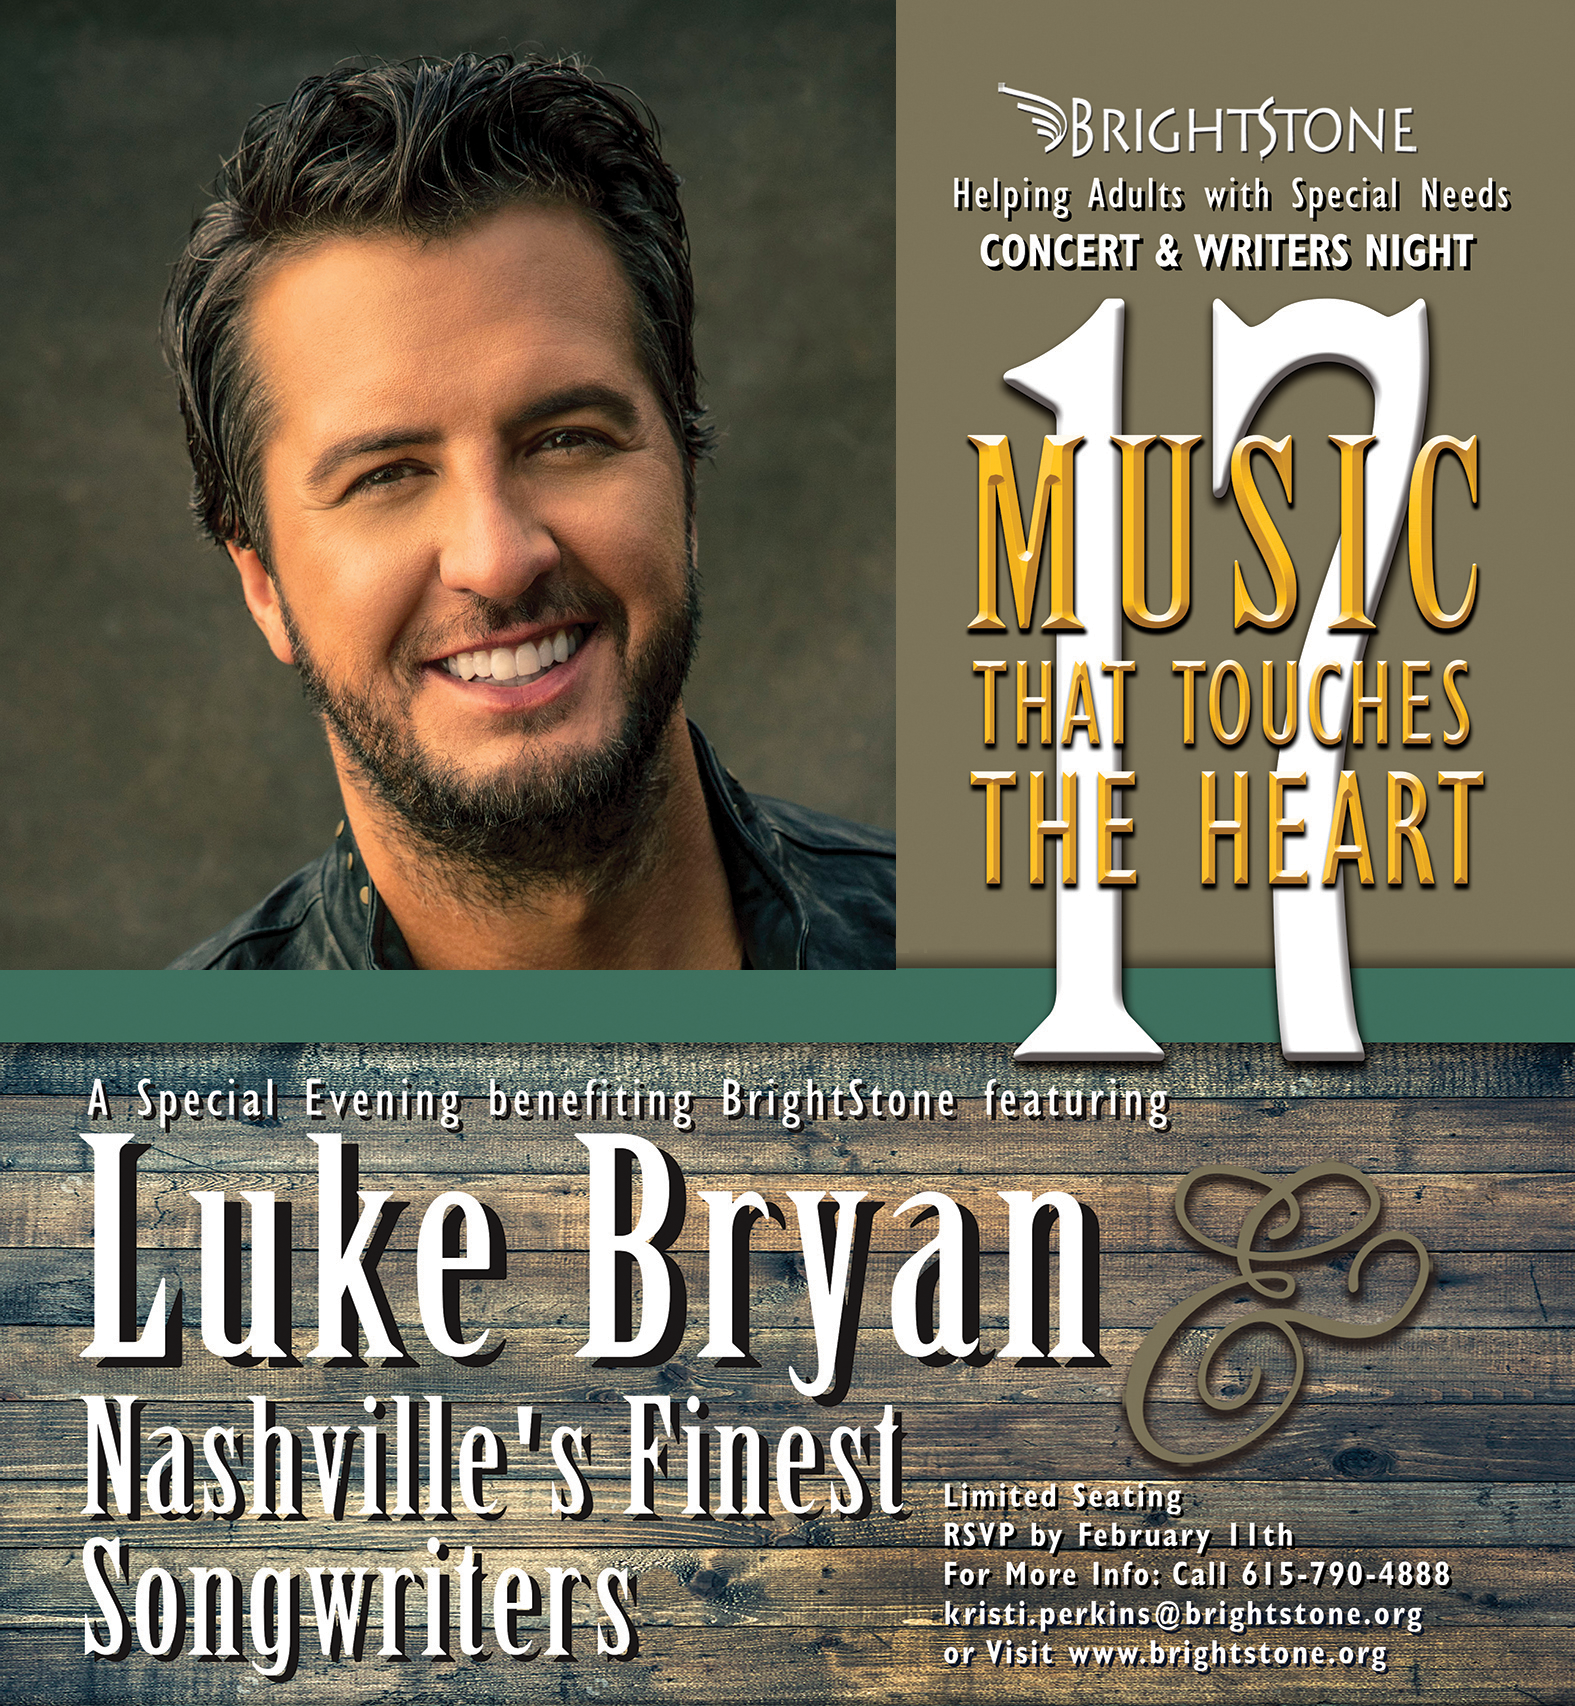 17th Annual Music That Touches the Heart featuring Luke Bryan, Feb. 19th 2019, Save the Date!